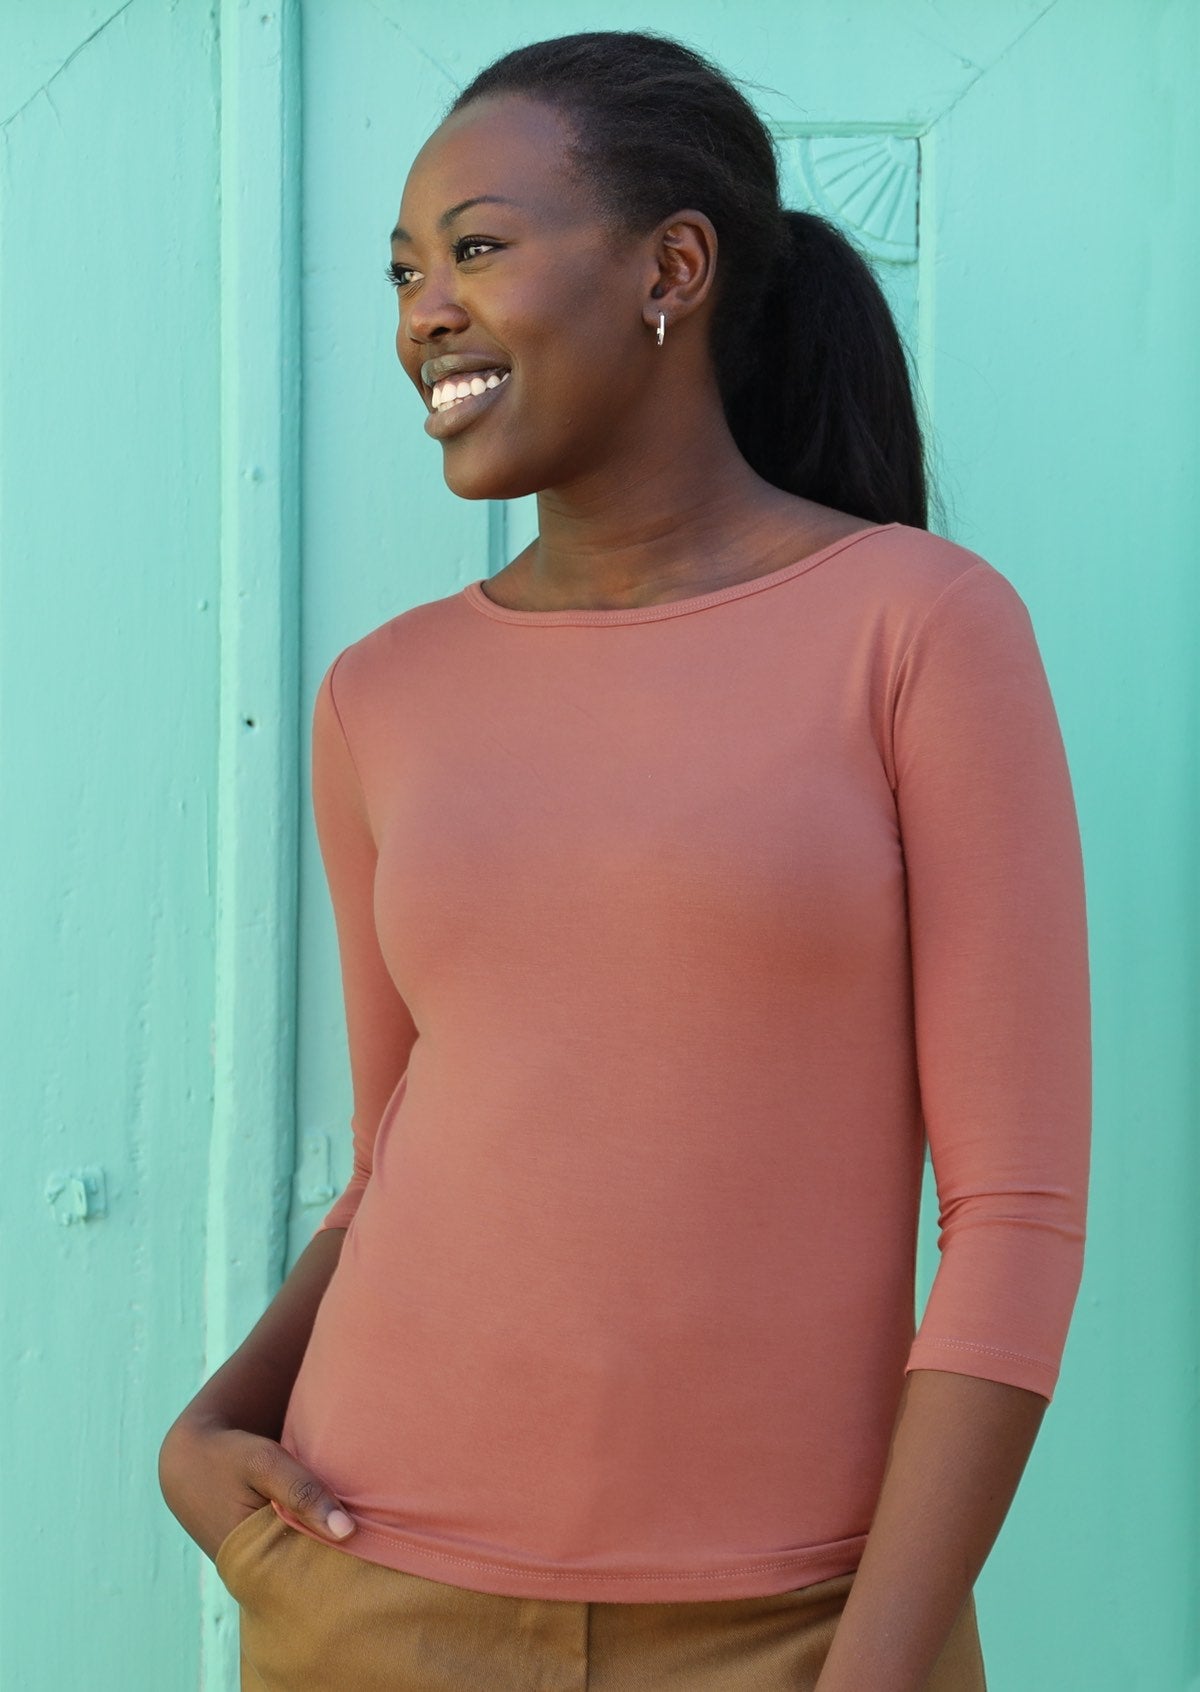 Woman wearing a rayon boat neck dusty pink 3/4 sleeve top.